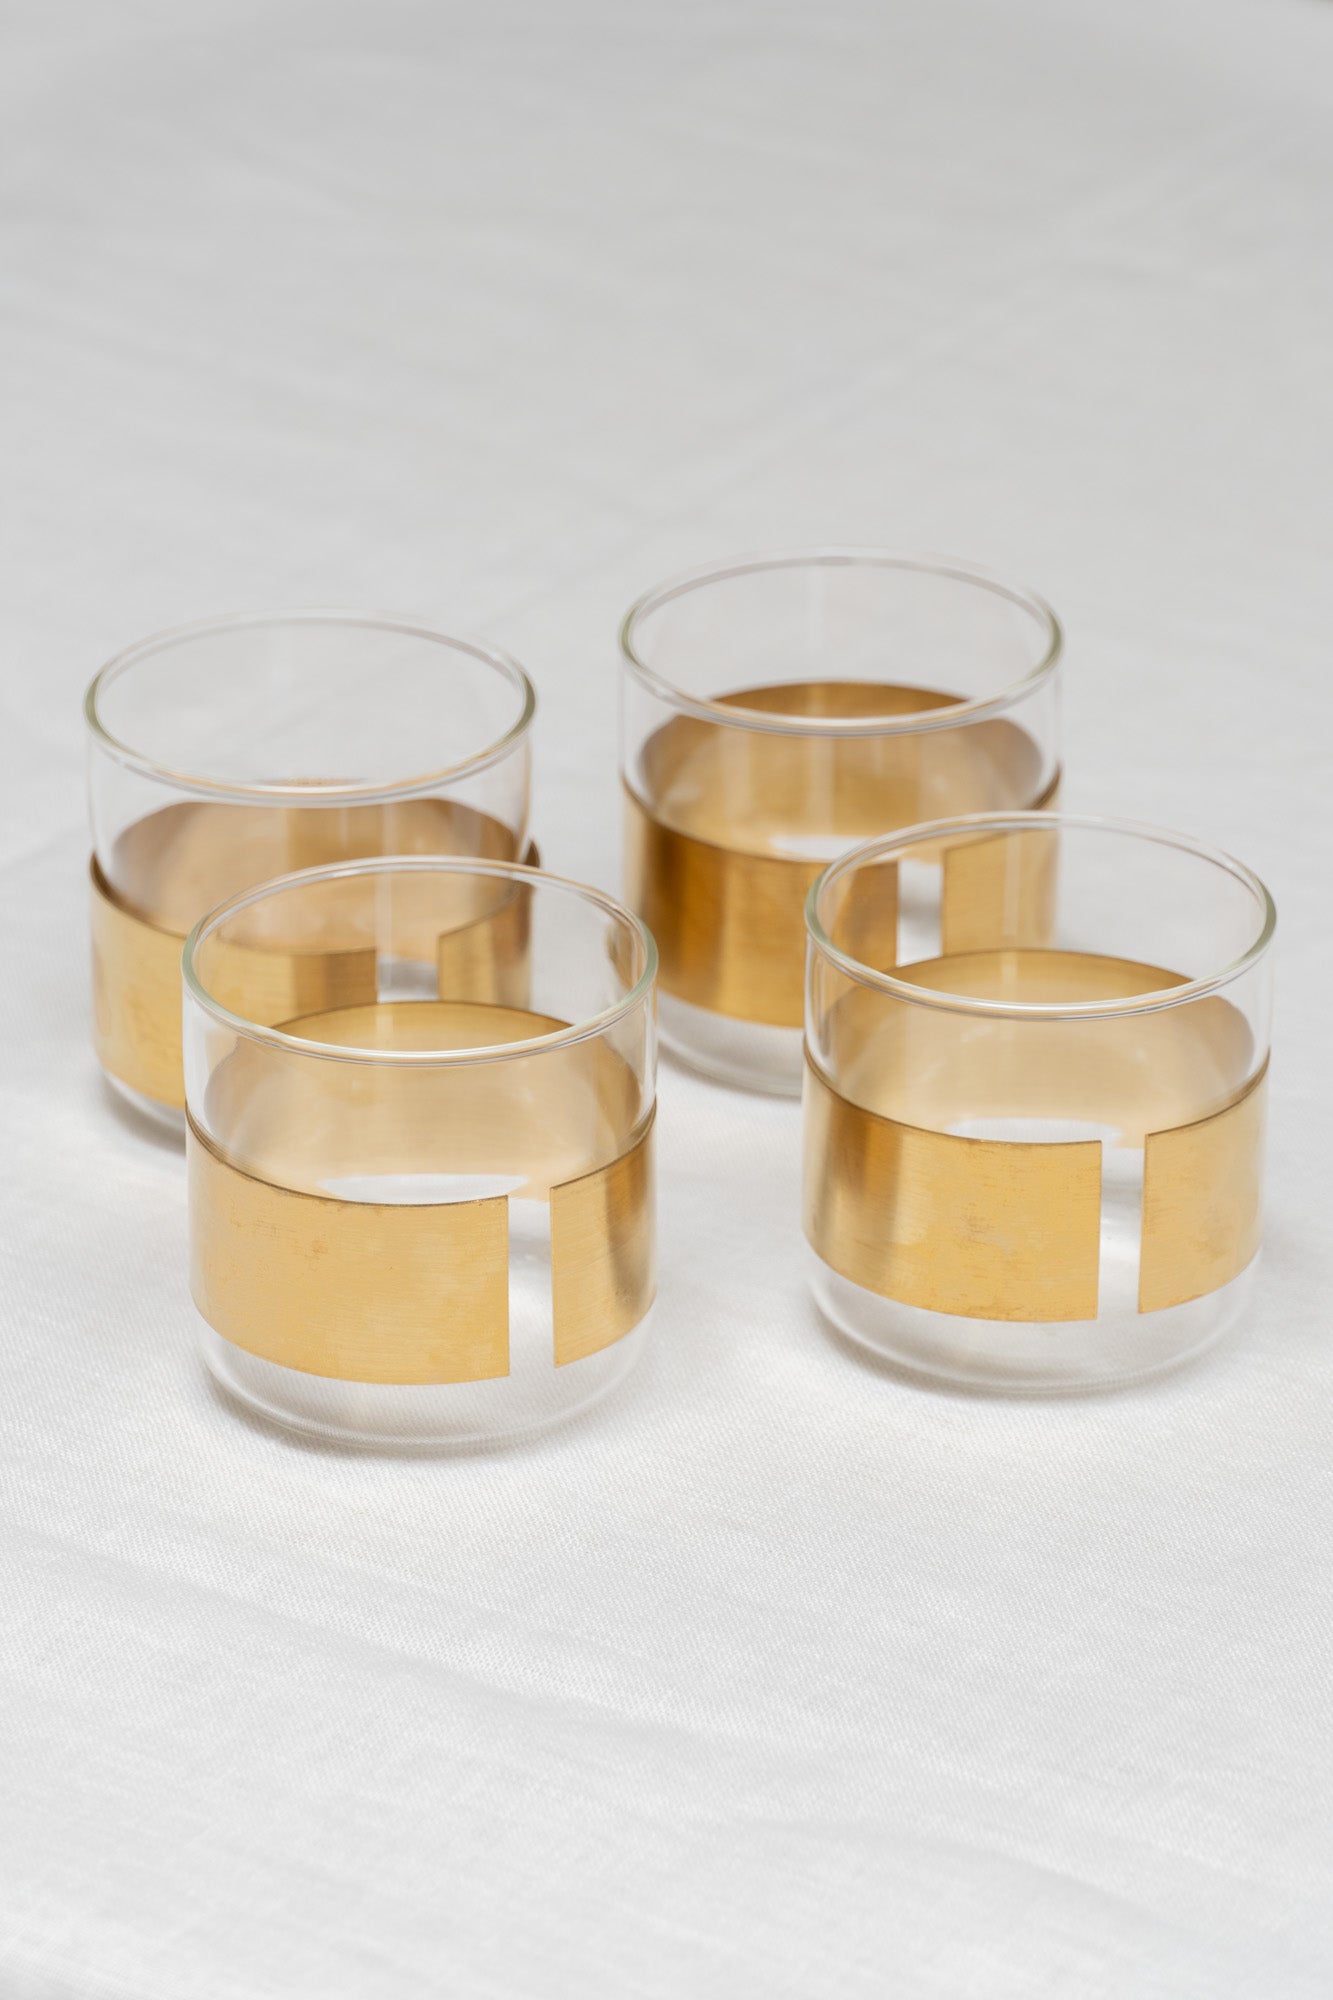 Copper Alchemy Chemistry Glass by Serax. Set of 4 clear glasses with copper plating.